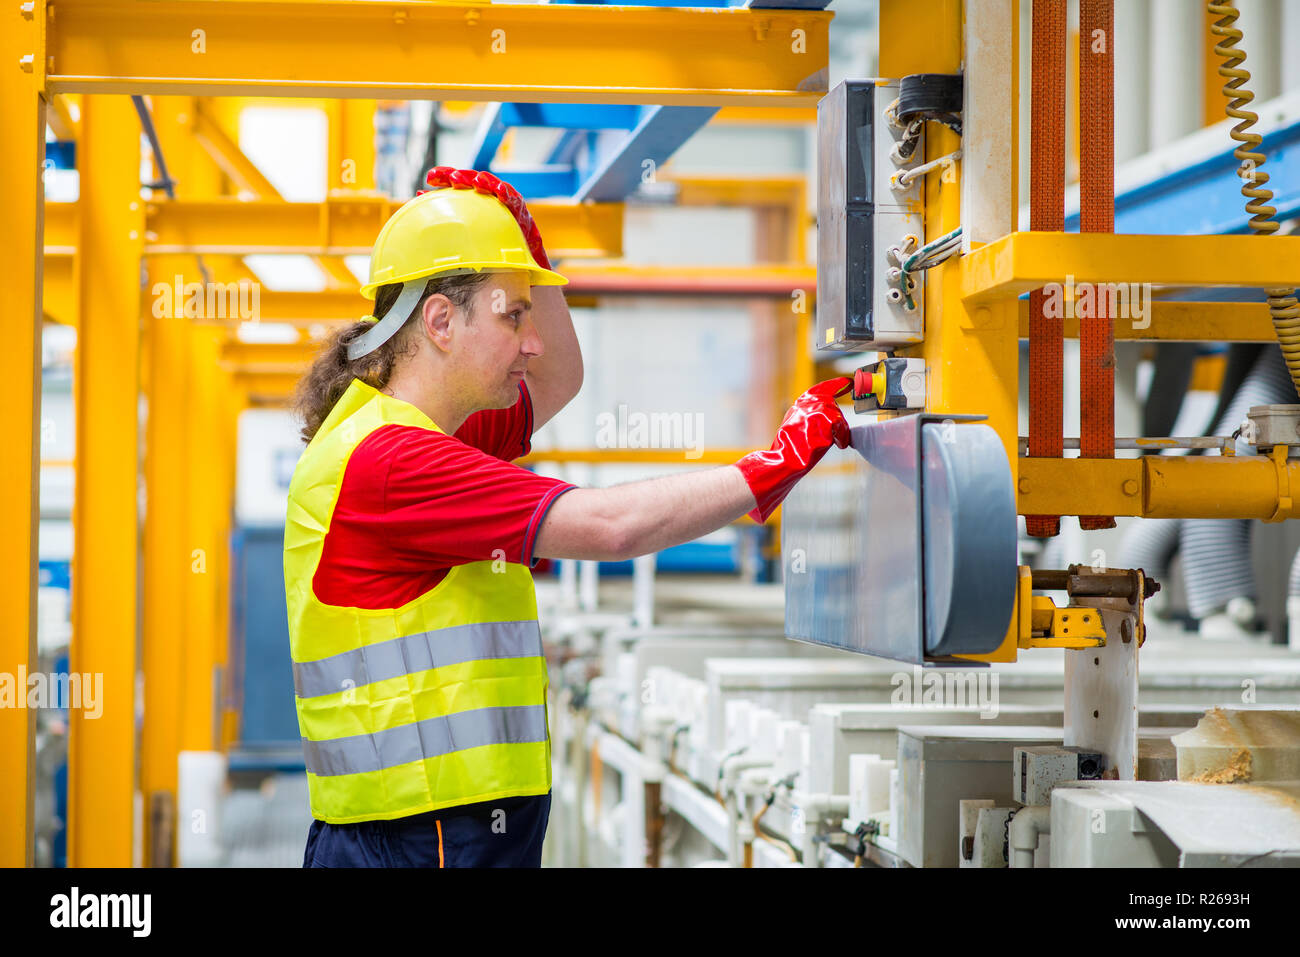 Worker in a factory operating a factory machine pressing a red button. Stock Photo